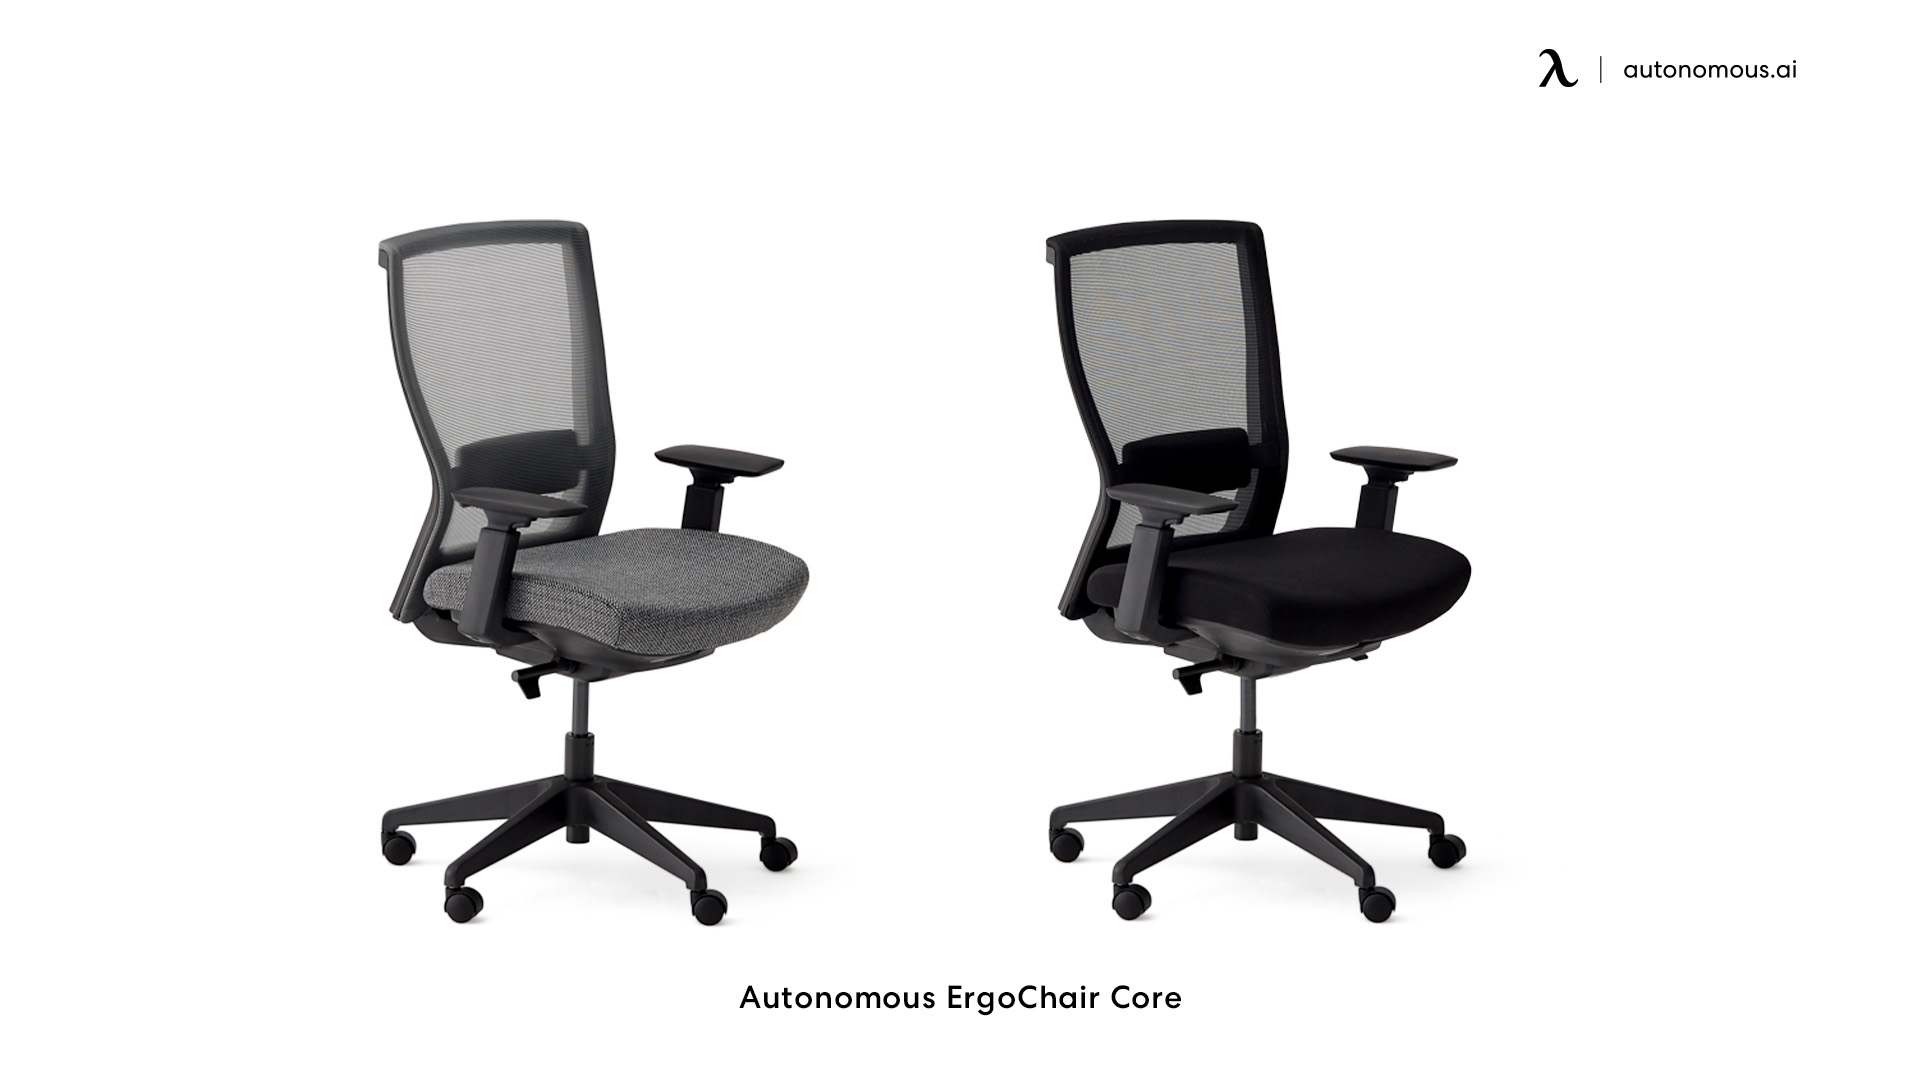 ErgoChair Core best affordable chairs for gaming